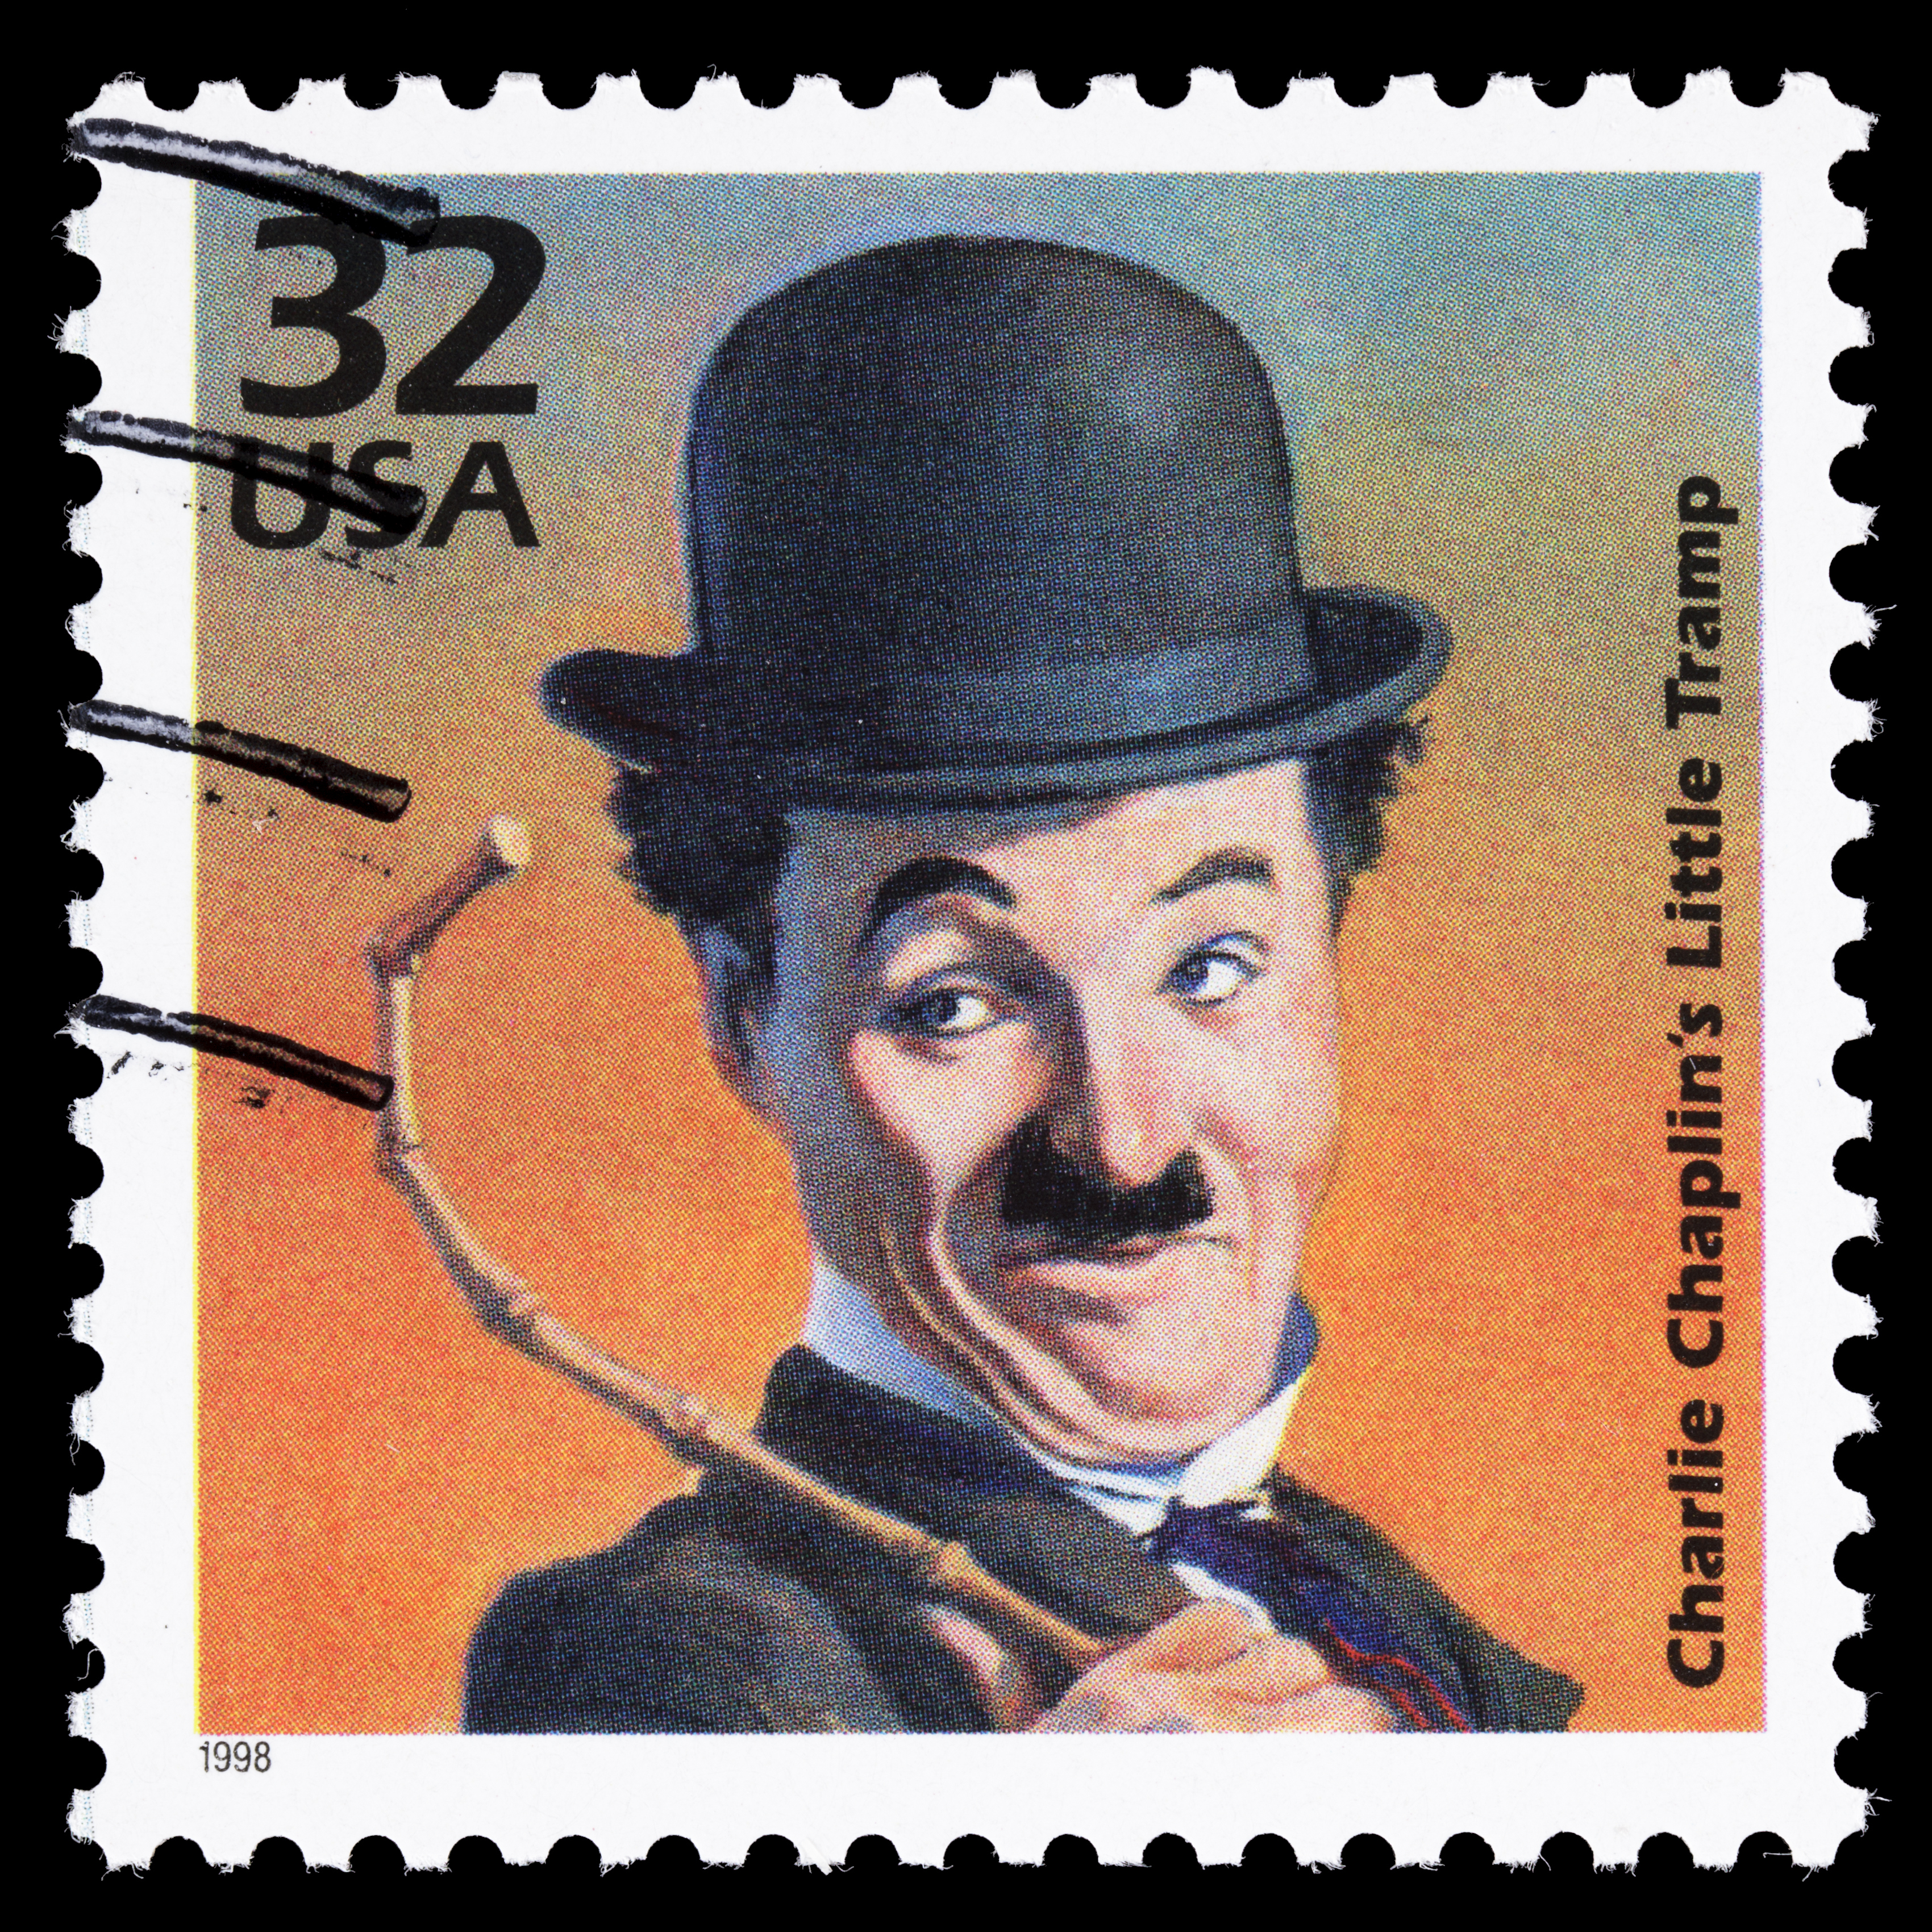 A 1998 USA Postage stamp with an illustration of Charlie Chaplin dressed as his Little Tramp character